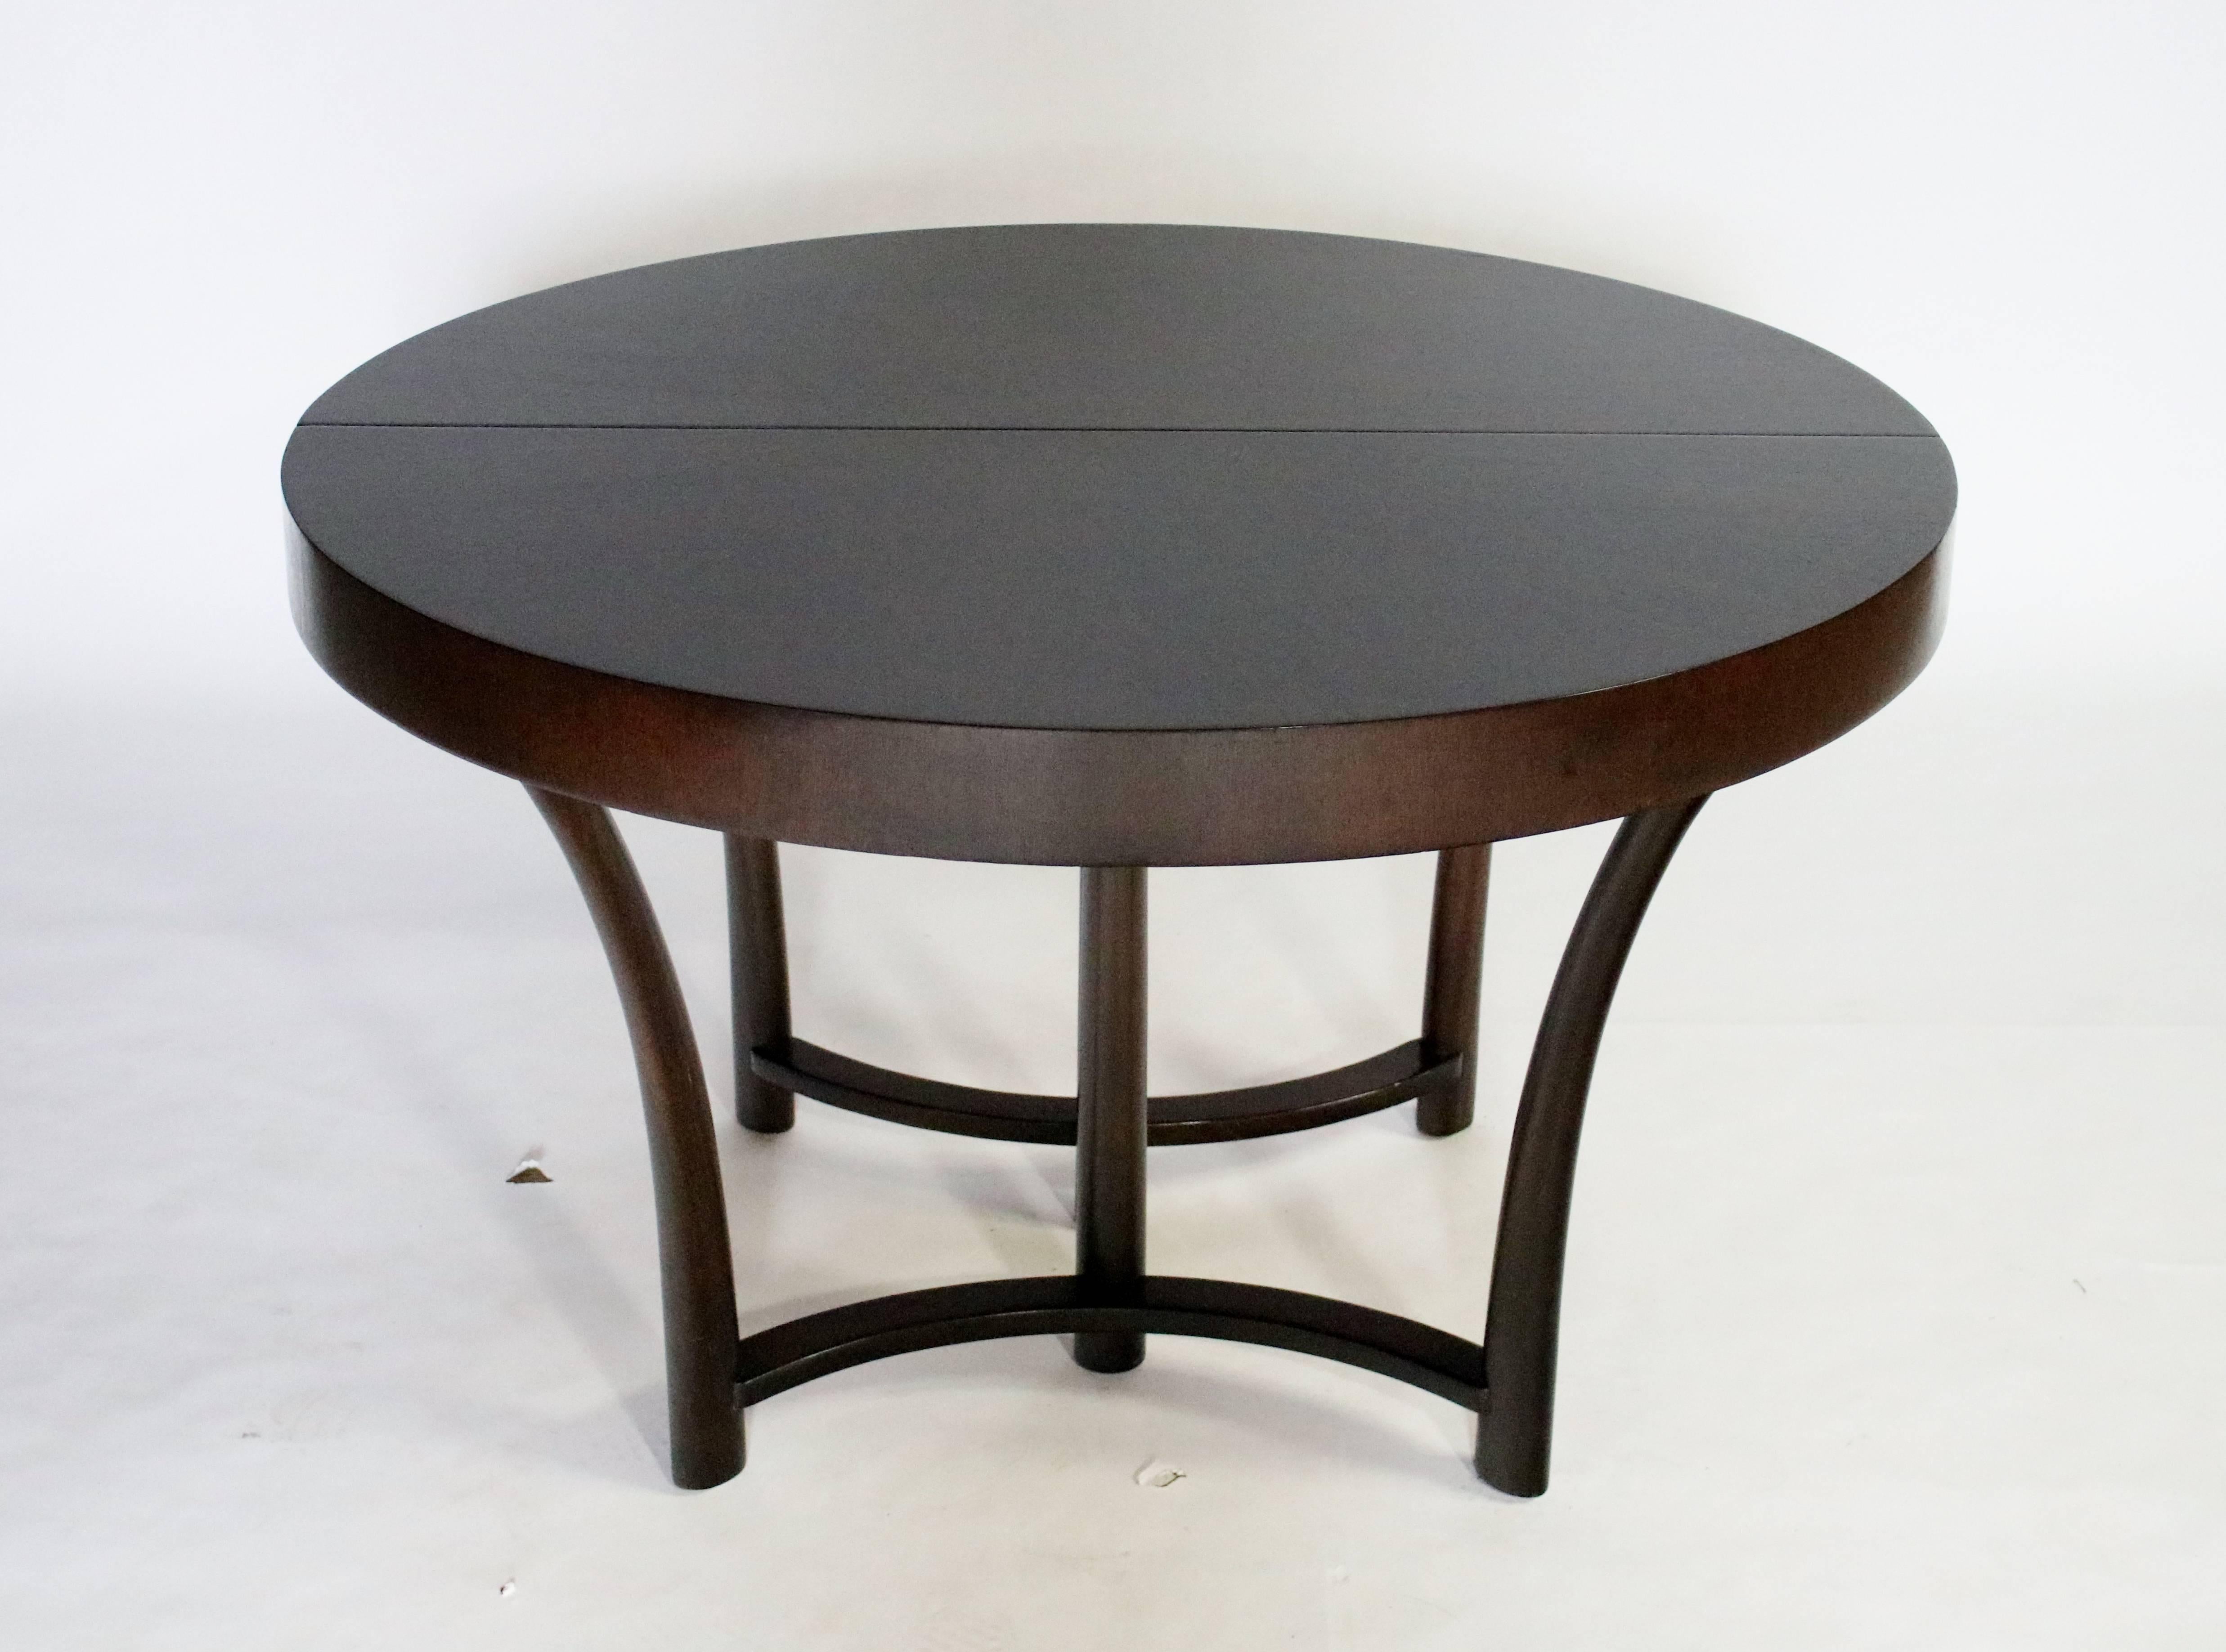 Mid-Century Modern T.H. Robsjohn-Gibbings Style Expandable Dining Table by Widdicomb, circa 1938